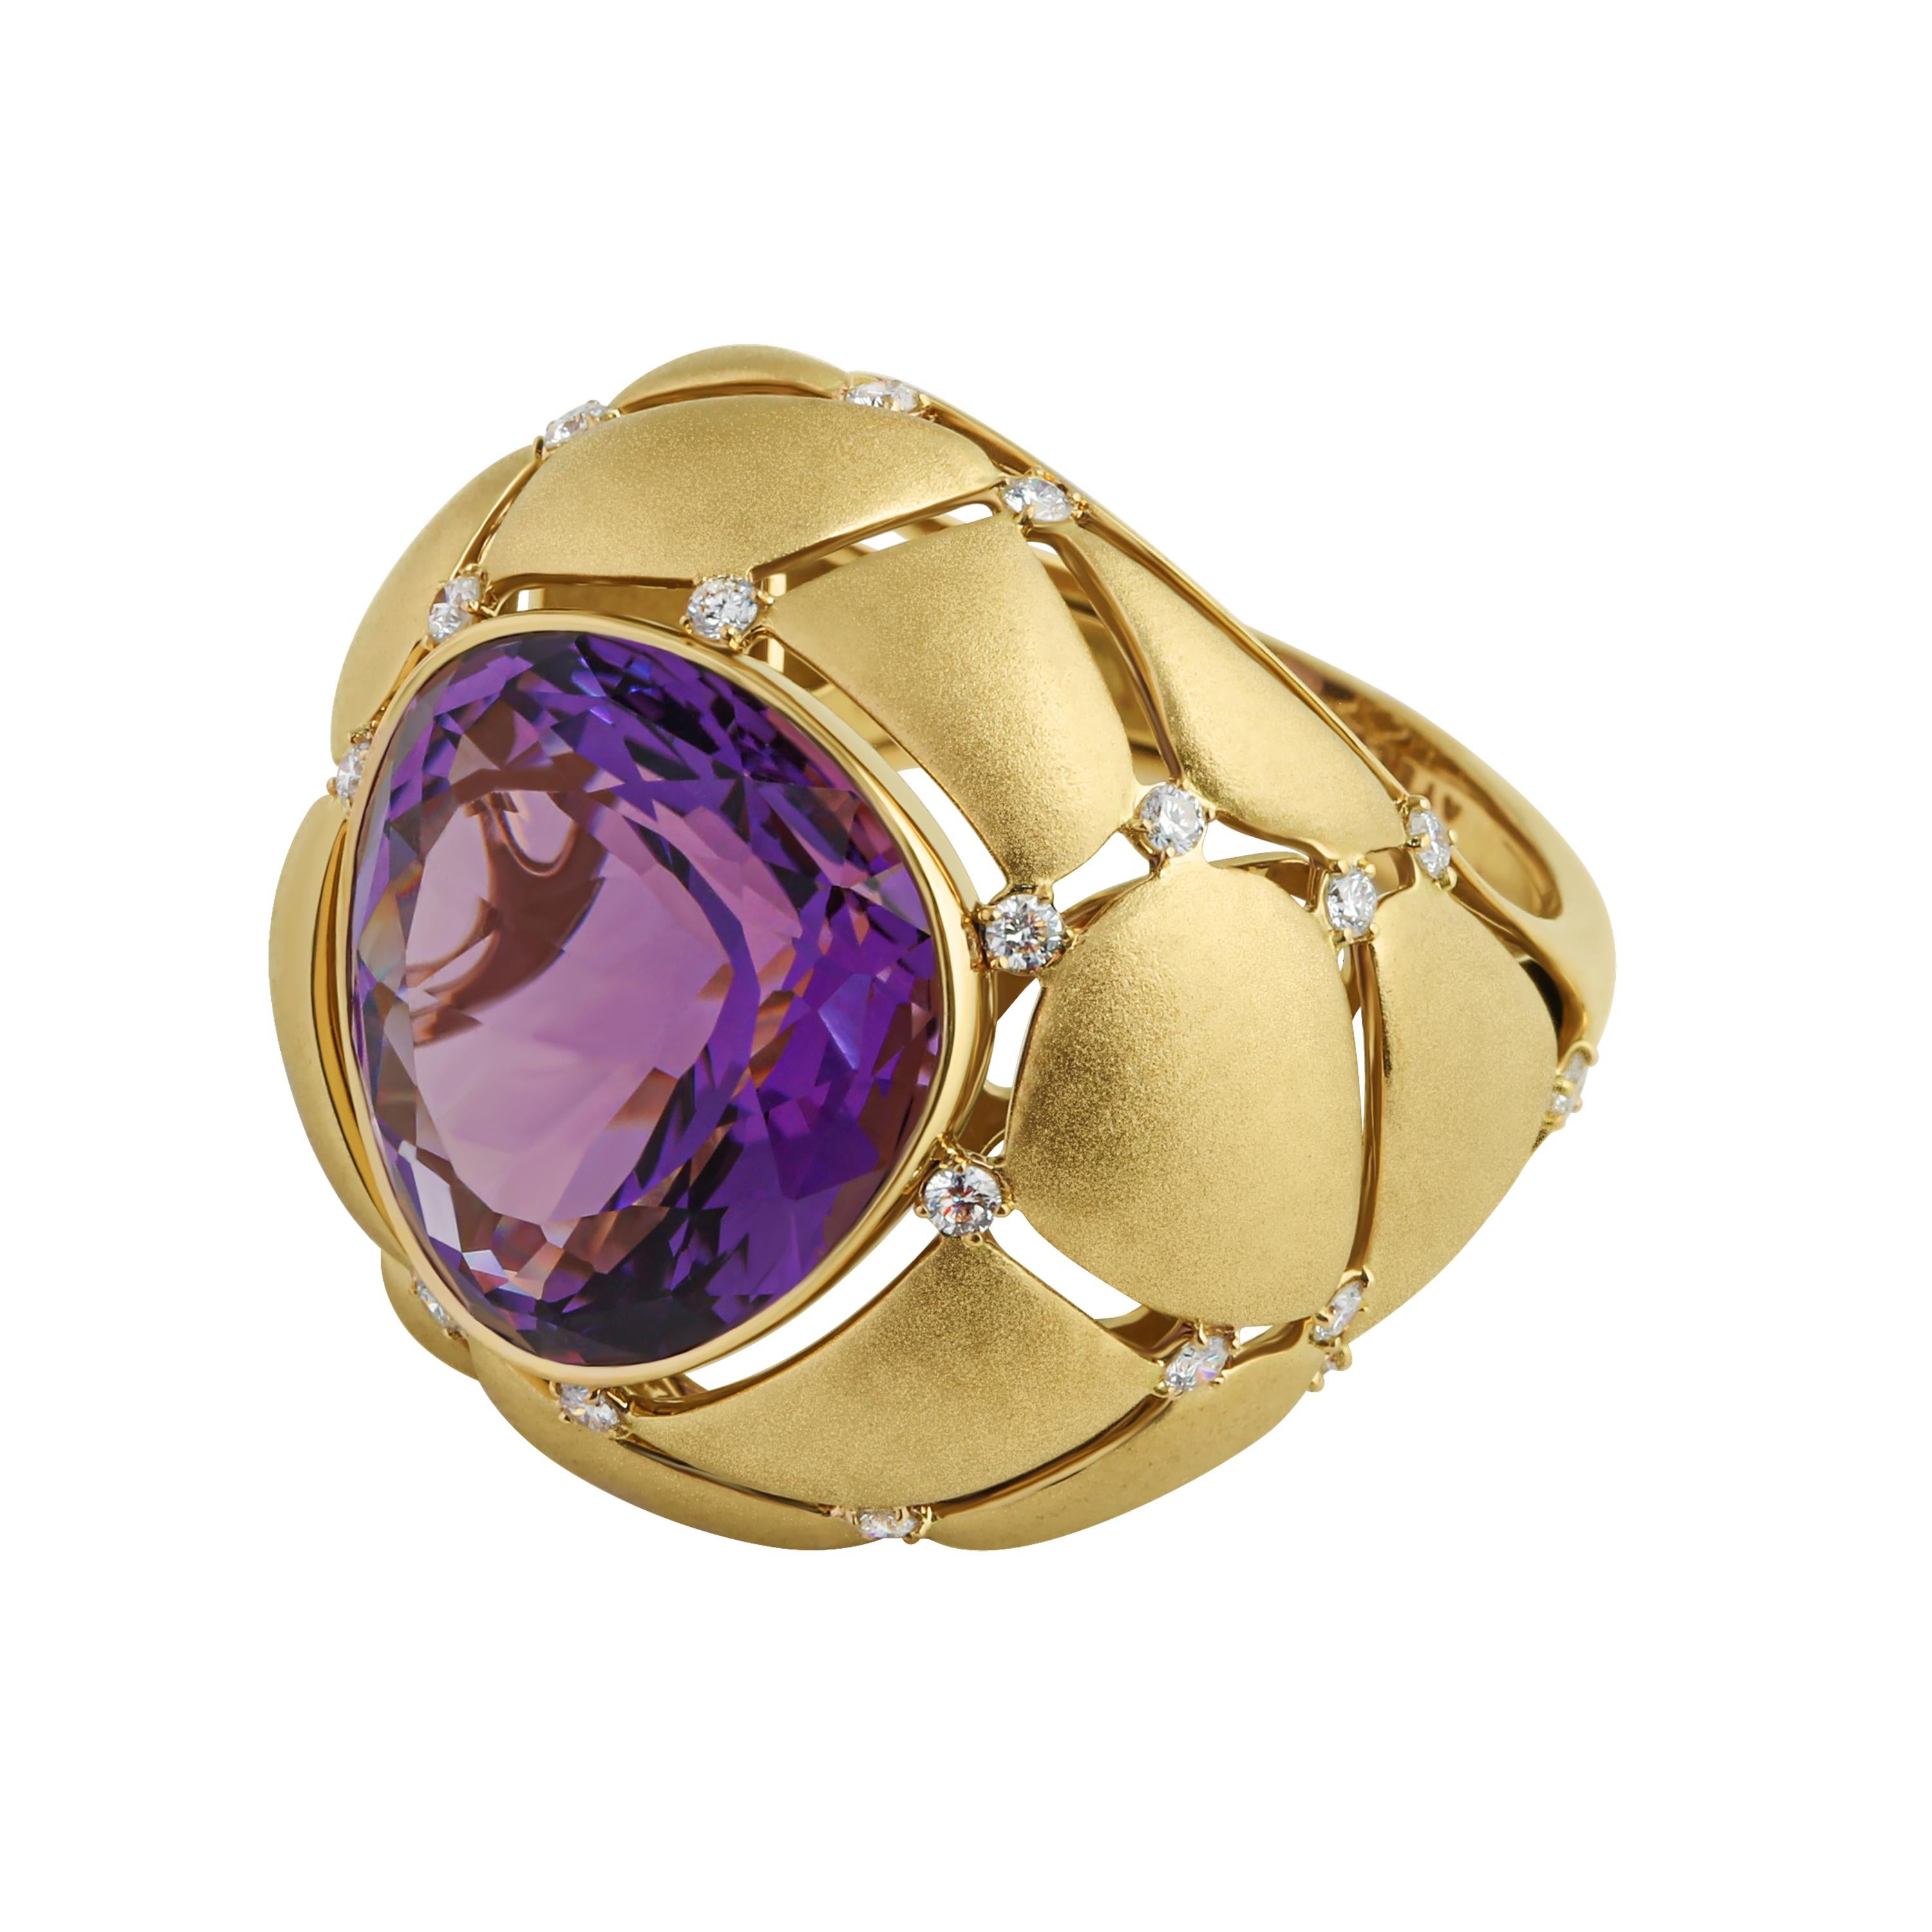 Amethyst 12.09 Carat White Diamonds 18 Karat Yellow Gold Ring
Take a look at this Ring! Looking at it, different associations can arise. For example, to someone it resembles a cotton flower. Others see it as cracked dry land in the desert. In any